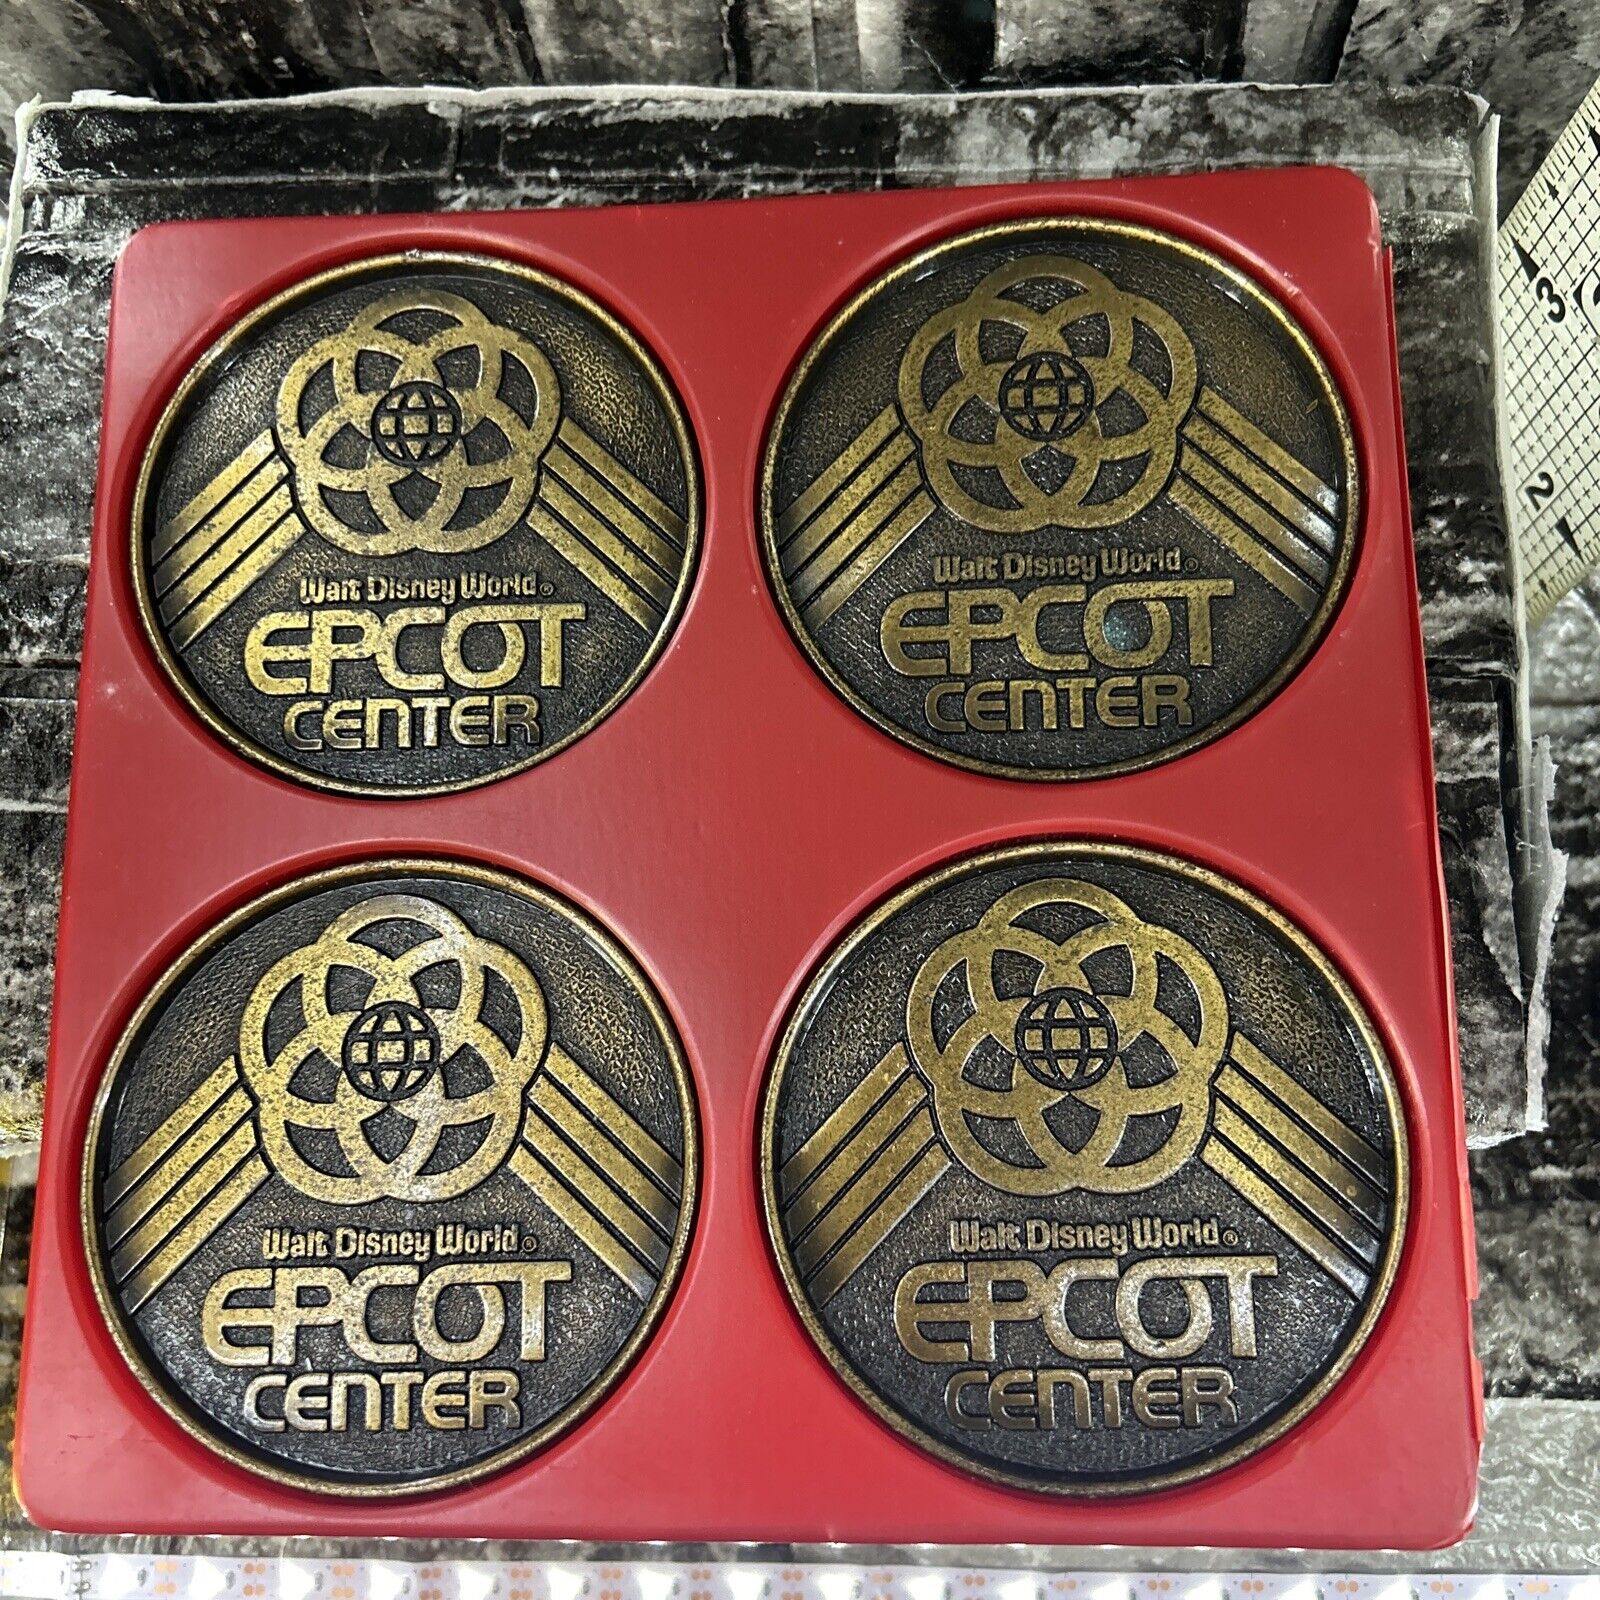 Walt Disney World Epcot Center Metal coaster coasters for cup cups (set of 4)